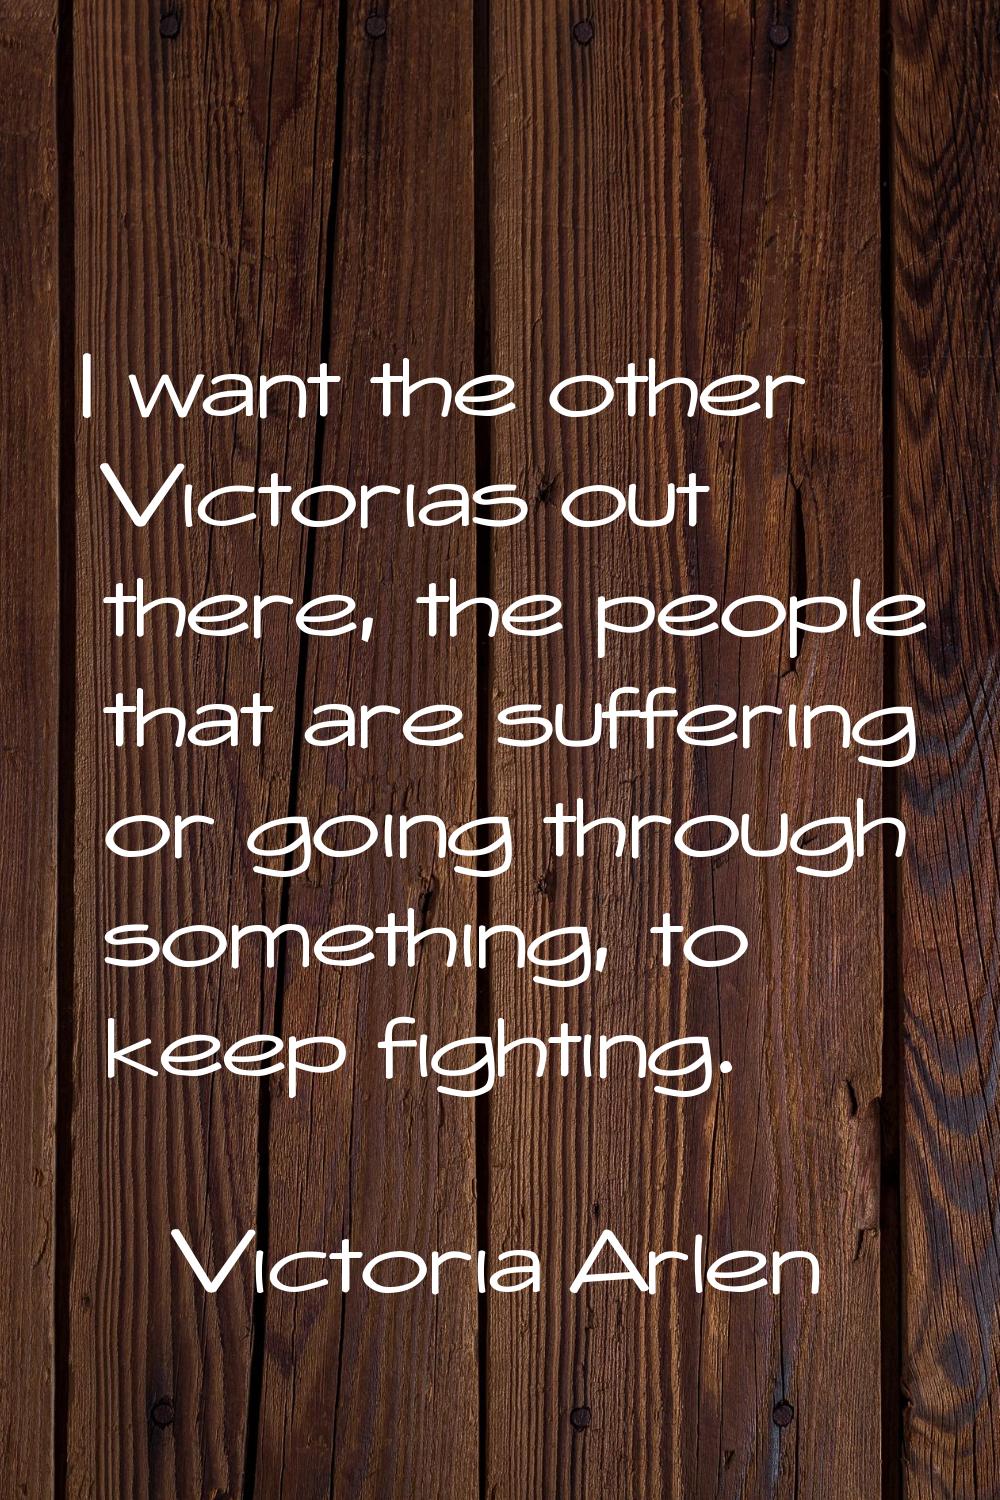 I want the other Victorias out there, the people that are suffering or going through something, to 